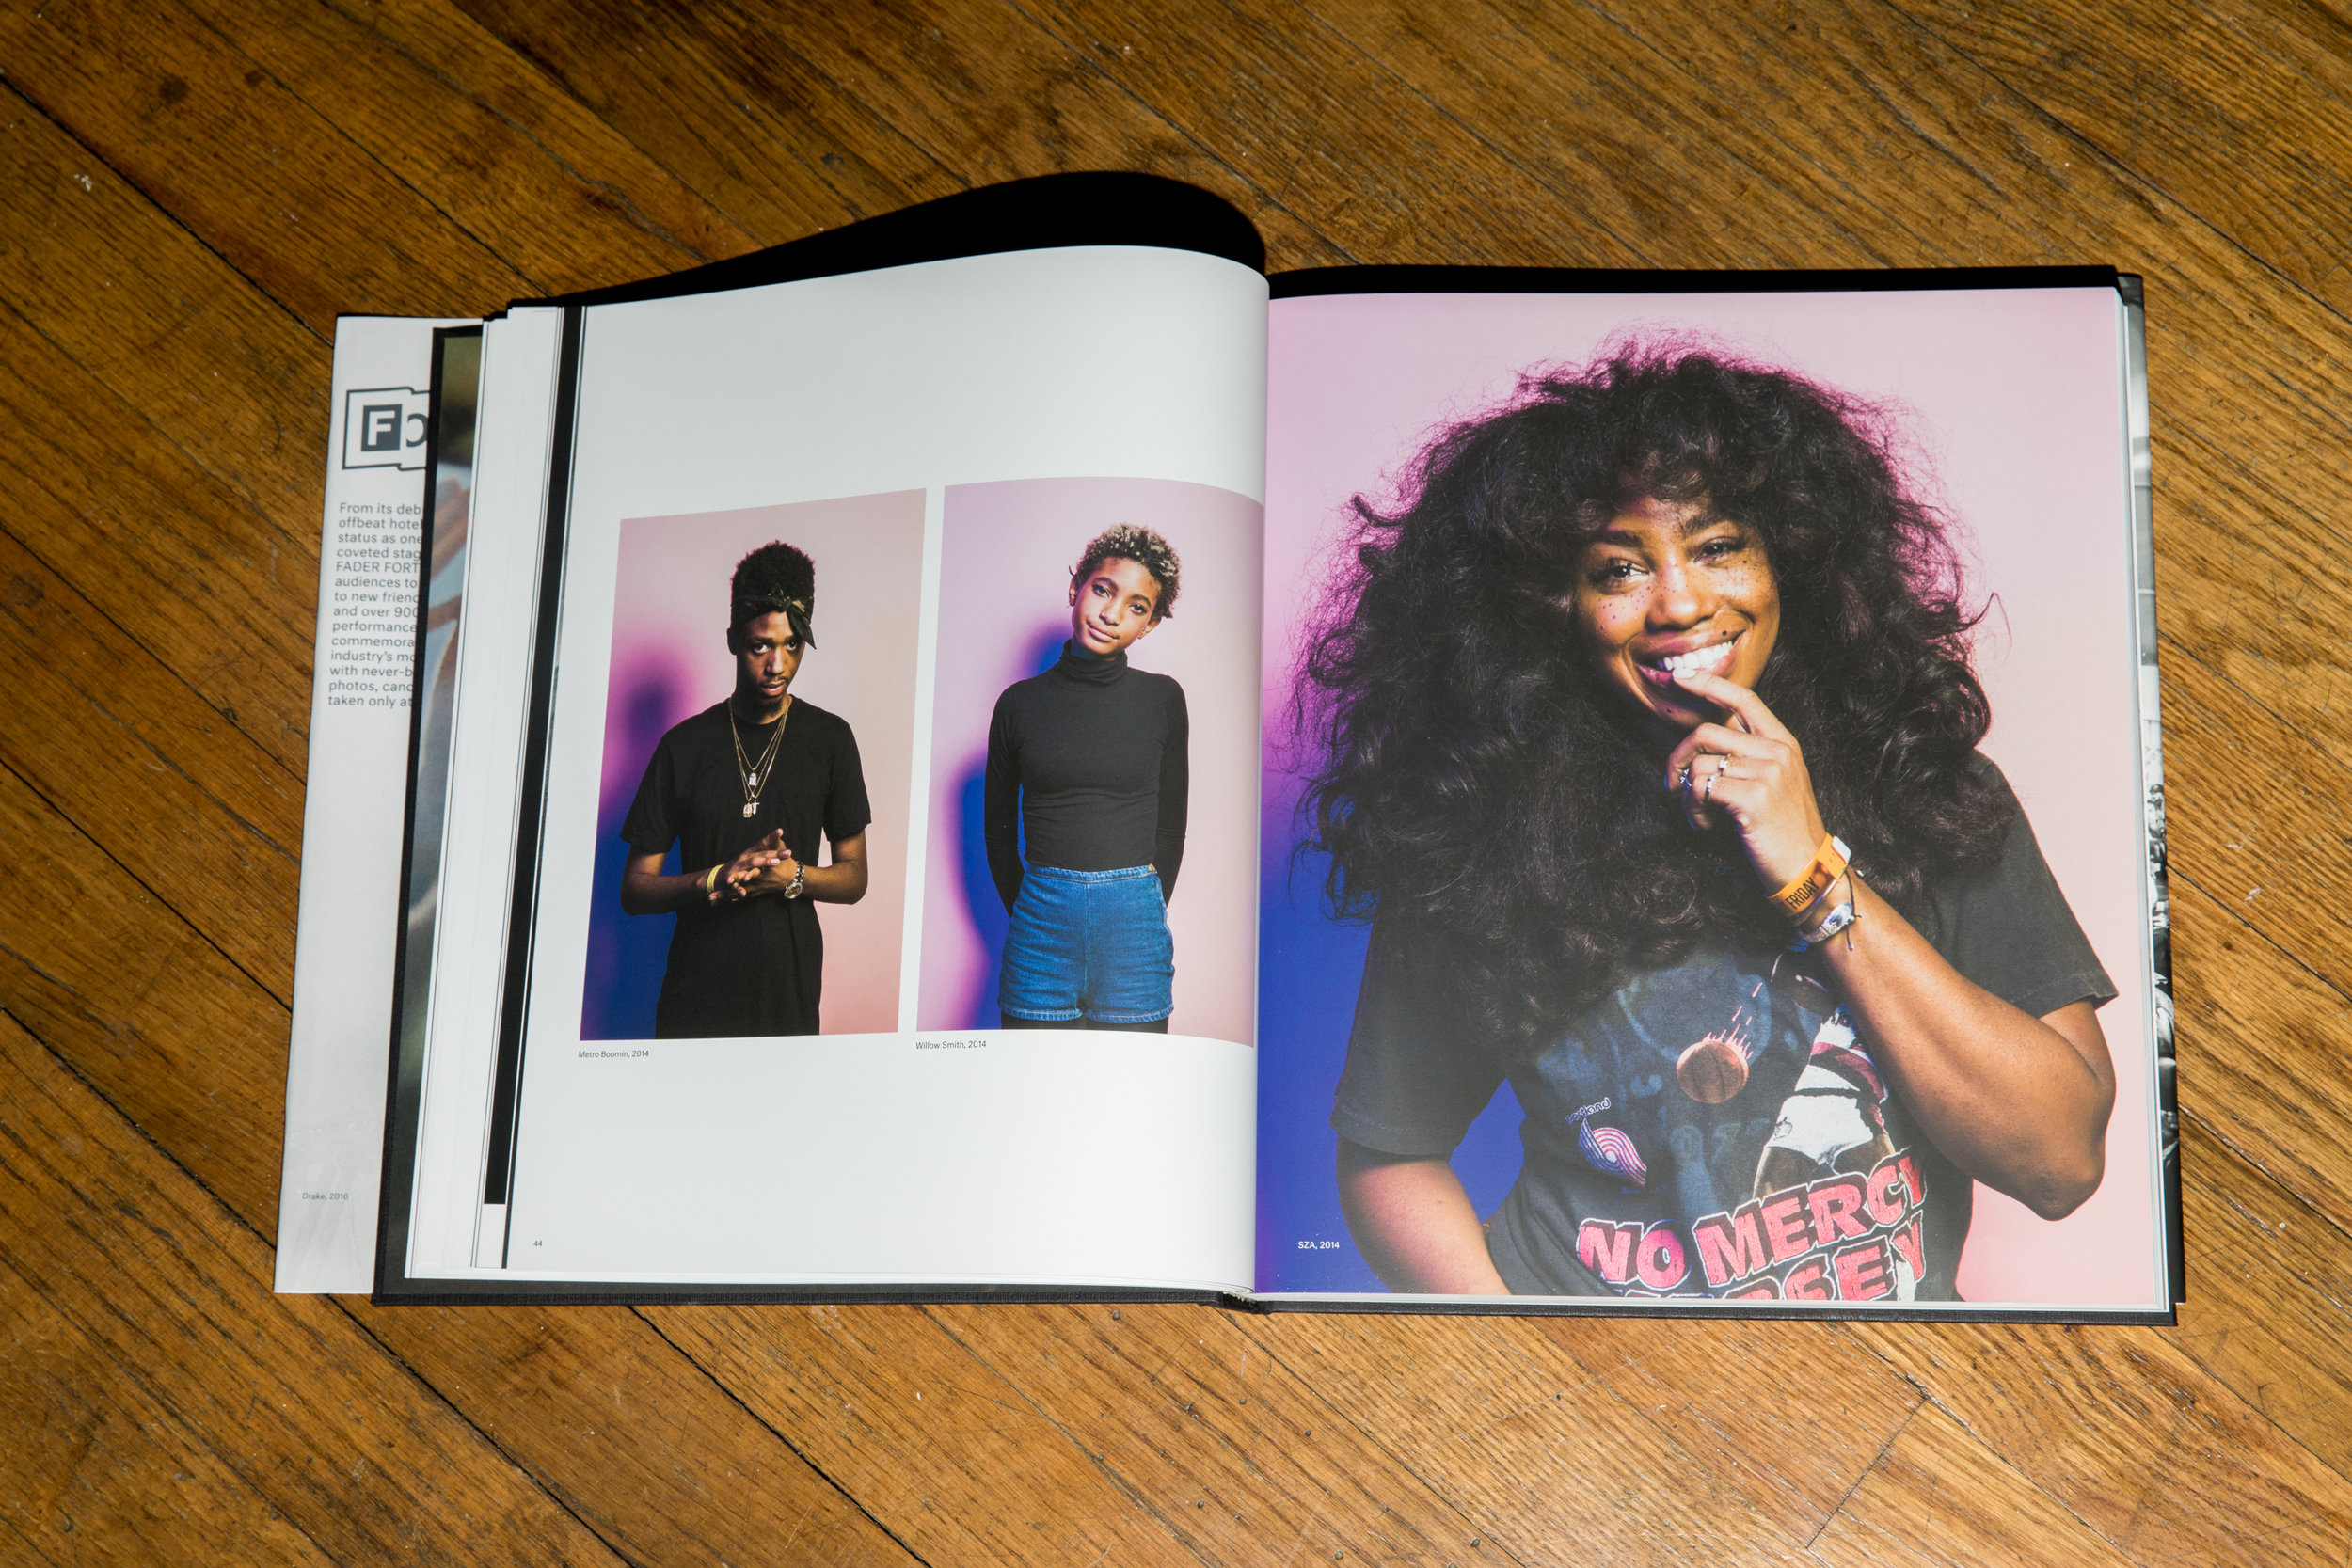  Fader Fort: Setting the Stage. Portraits from The Fader’s annual music festival, Fader Fort. 